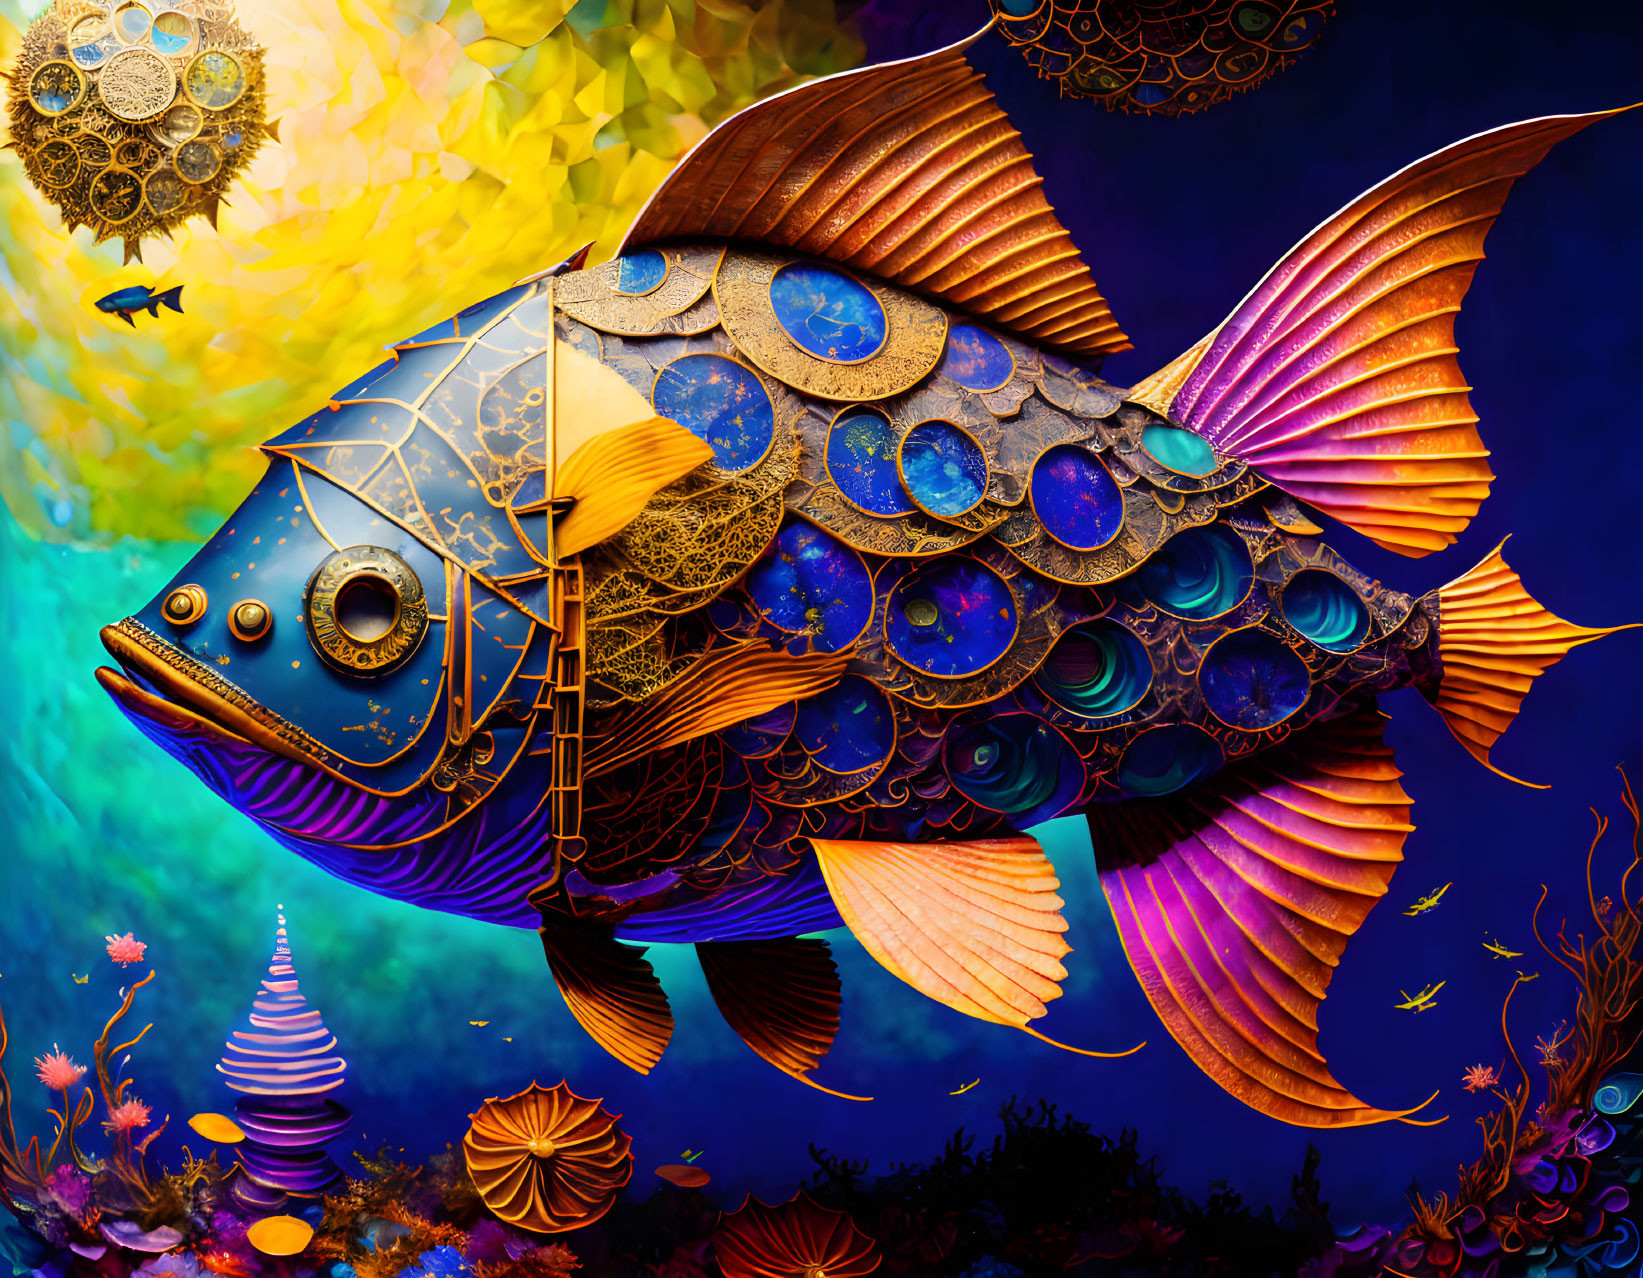 Colorful Stylized Fish Artwork in Surreal Underwater Scene